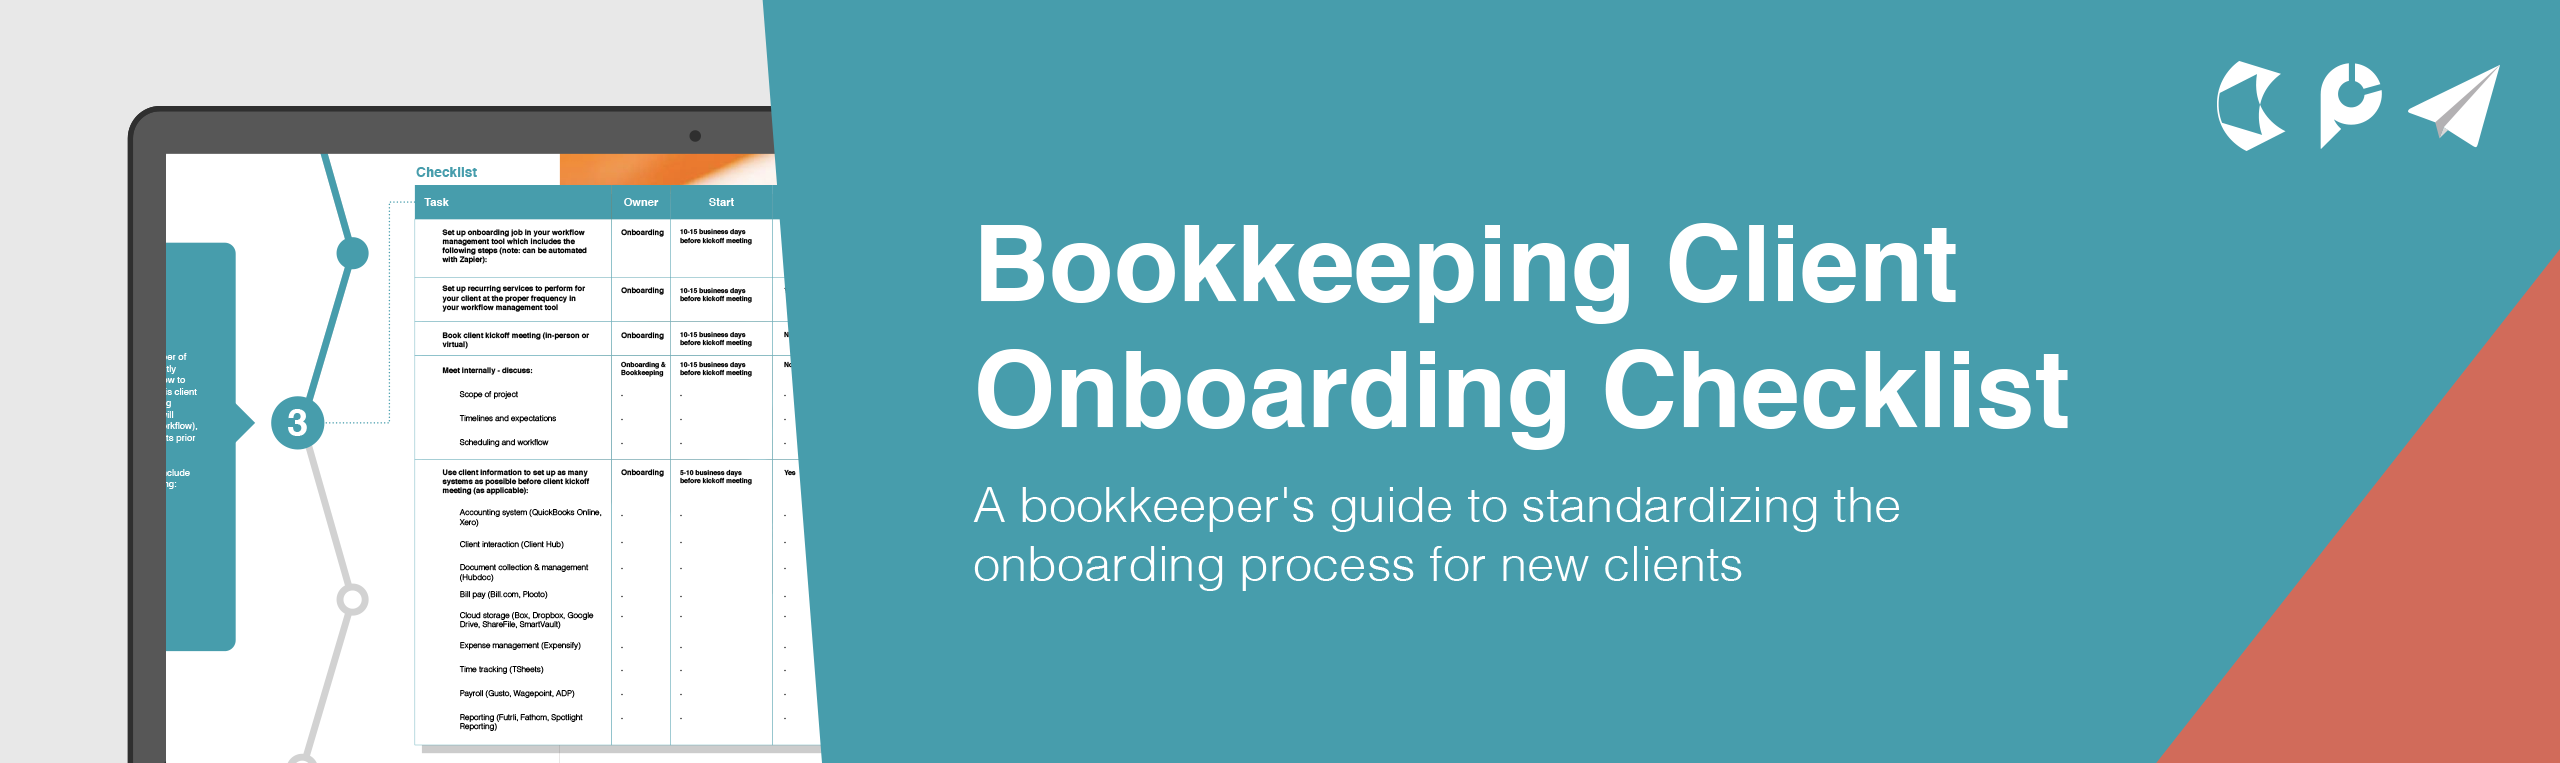 Bookkeeping Client Onboarding Checklist